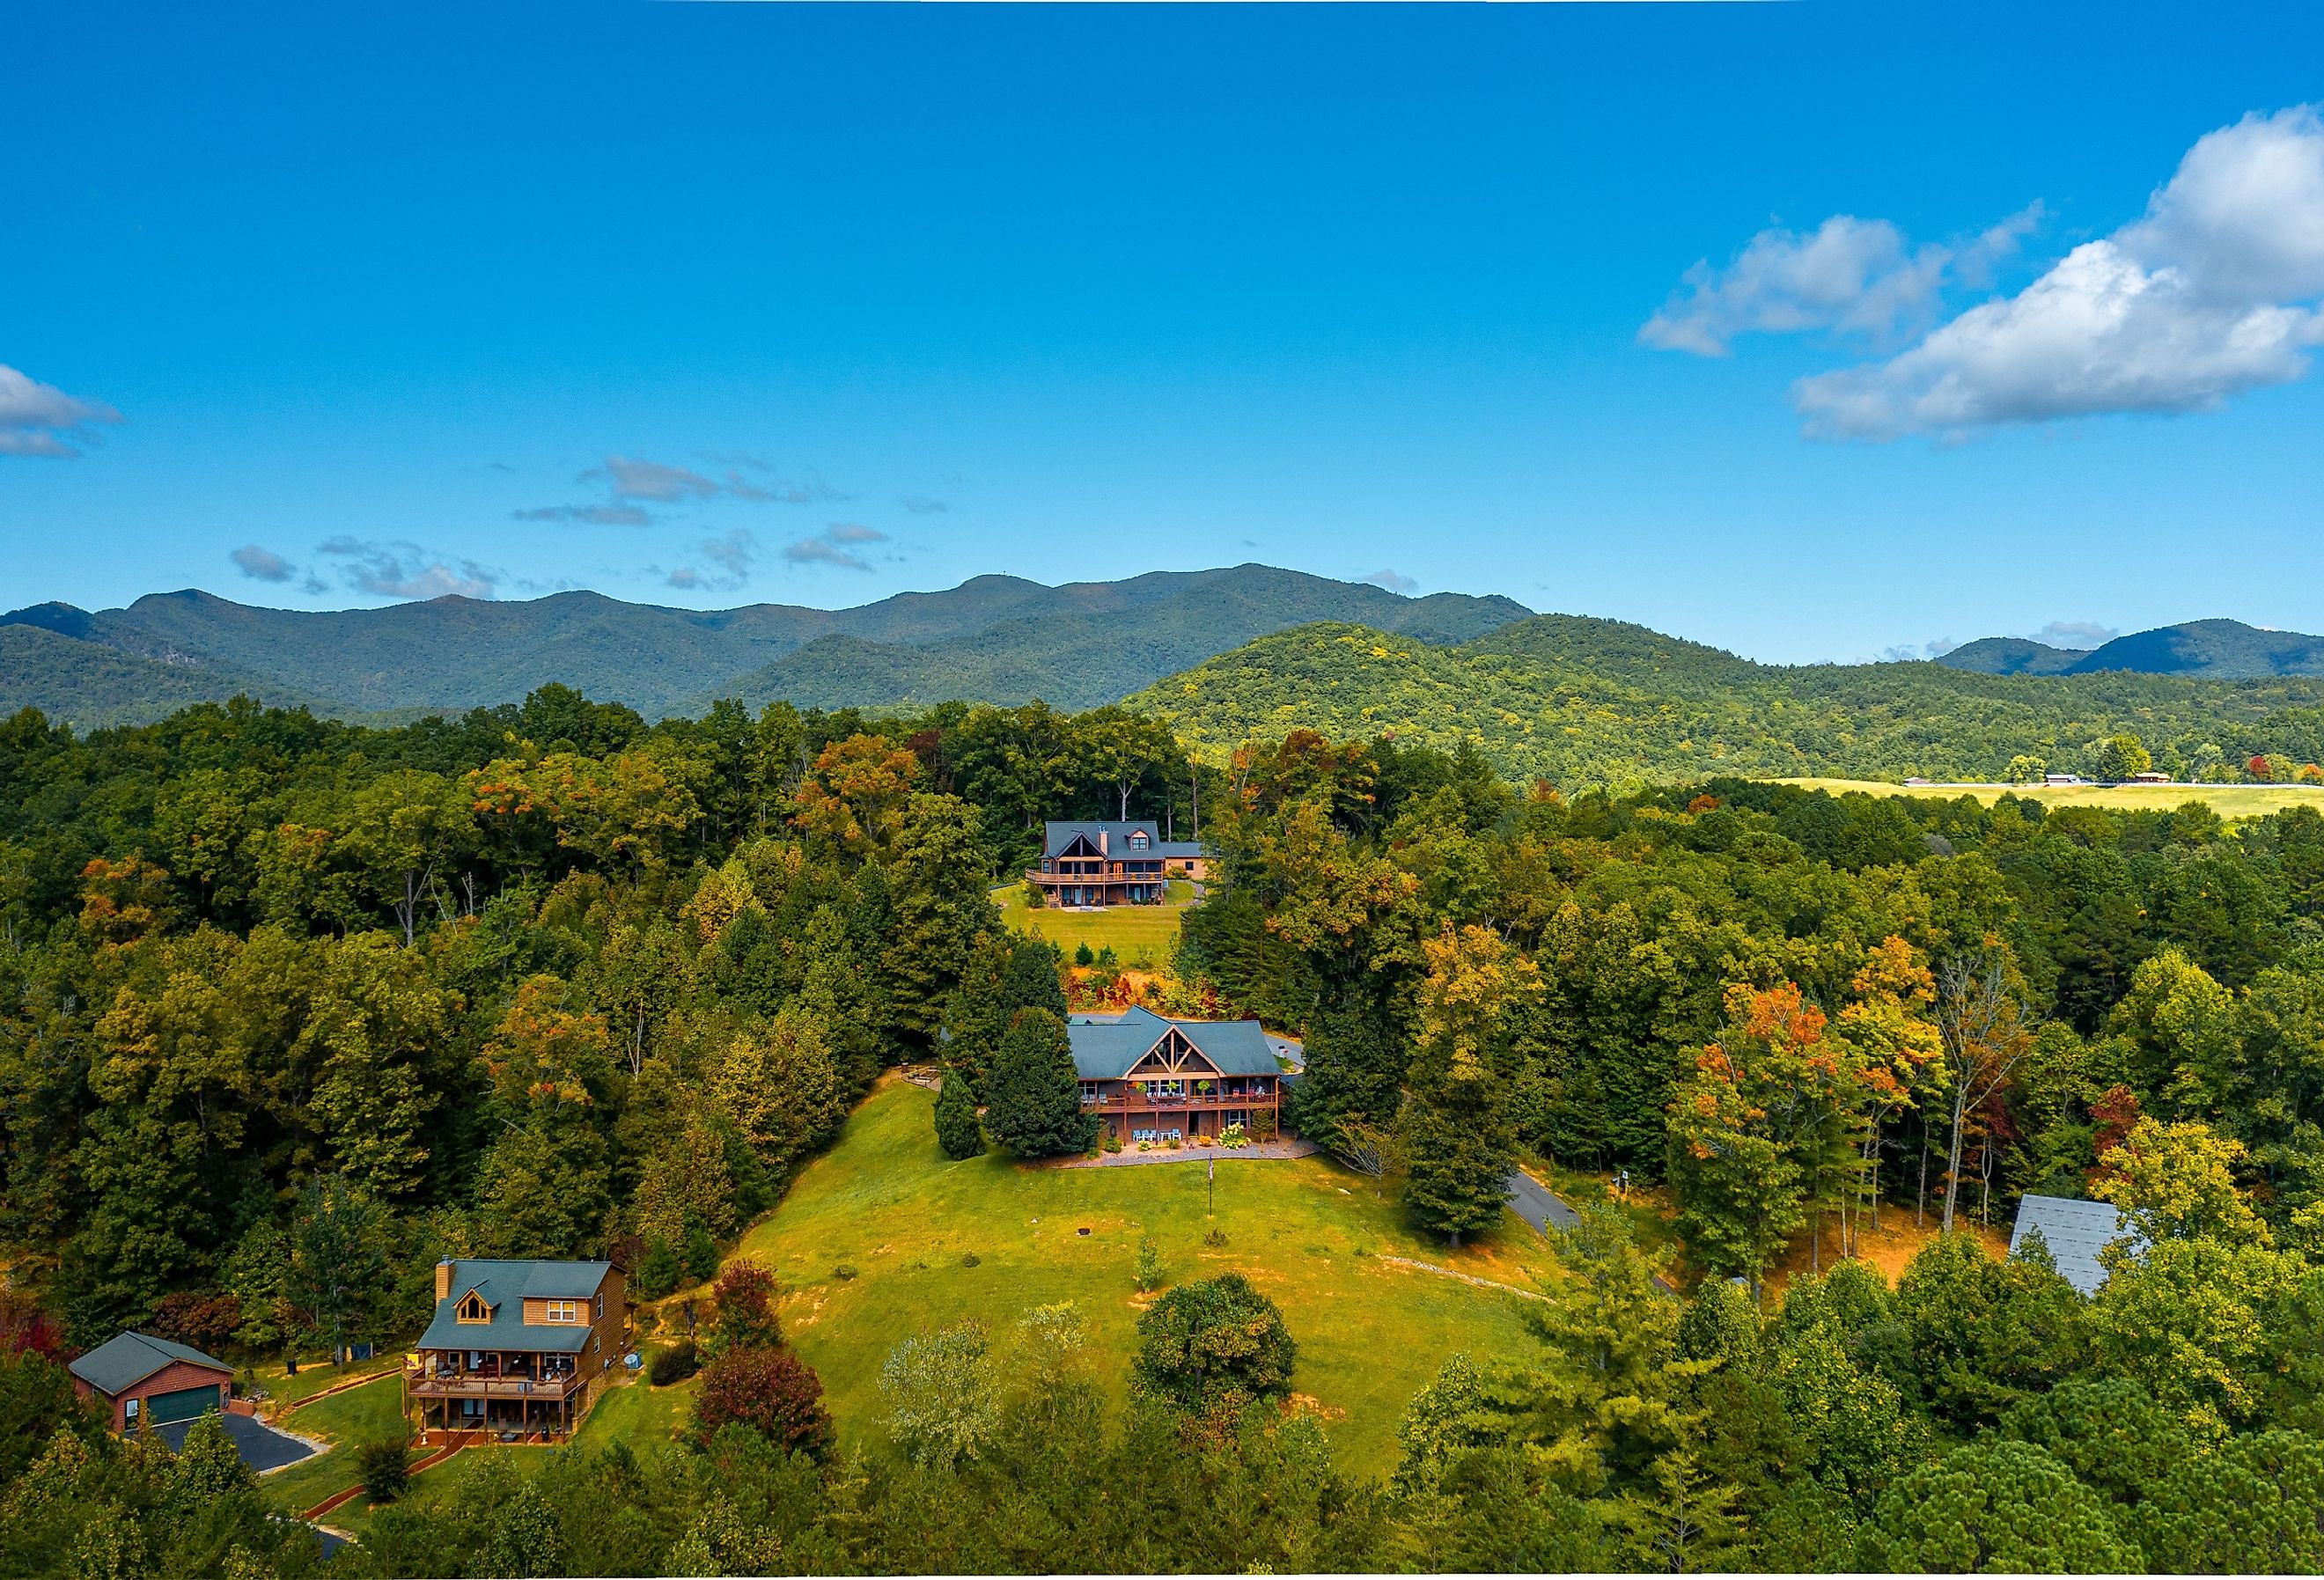 Aerial view of small town Blue Ridge in Georgia with the Blue Ridge Mountains in the background.